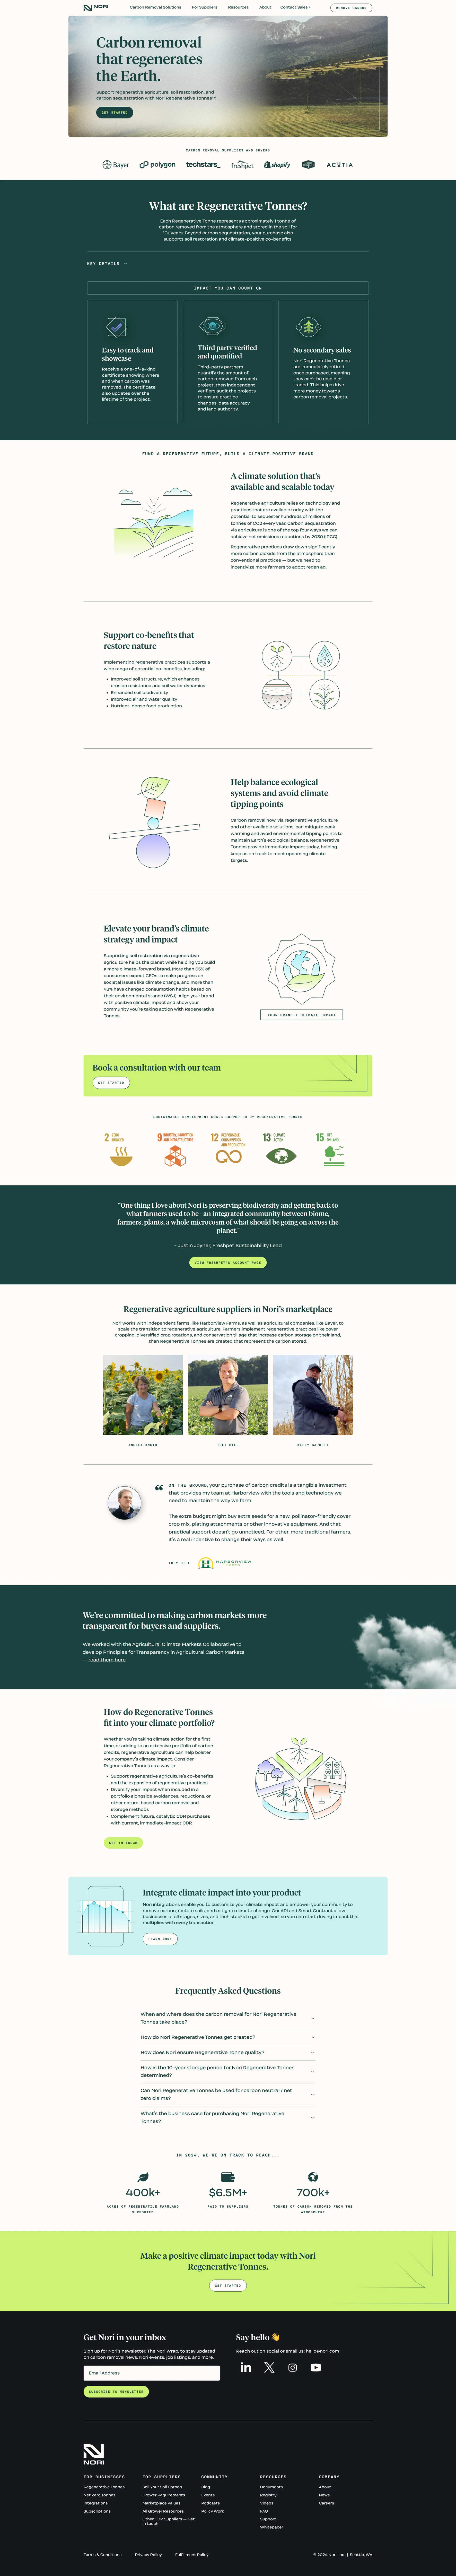 Nori Landing Page Example: Drive positive climate impact with verified carbon removals. Meet your business’ climate goals with carbon removal solutions that regenerate the Earth, compensate for emissions, and integrate directly into your products.